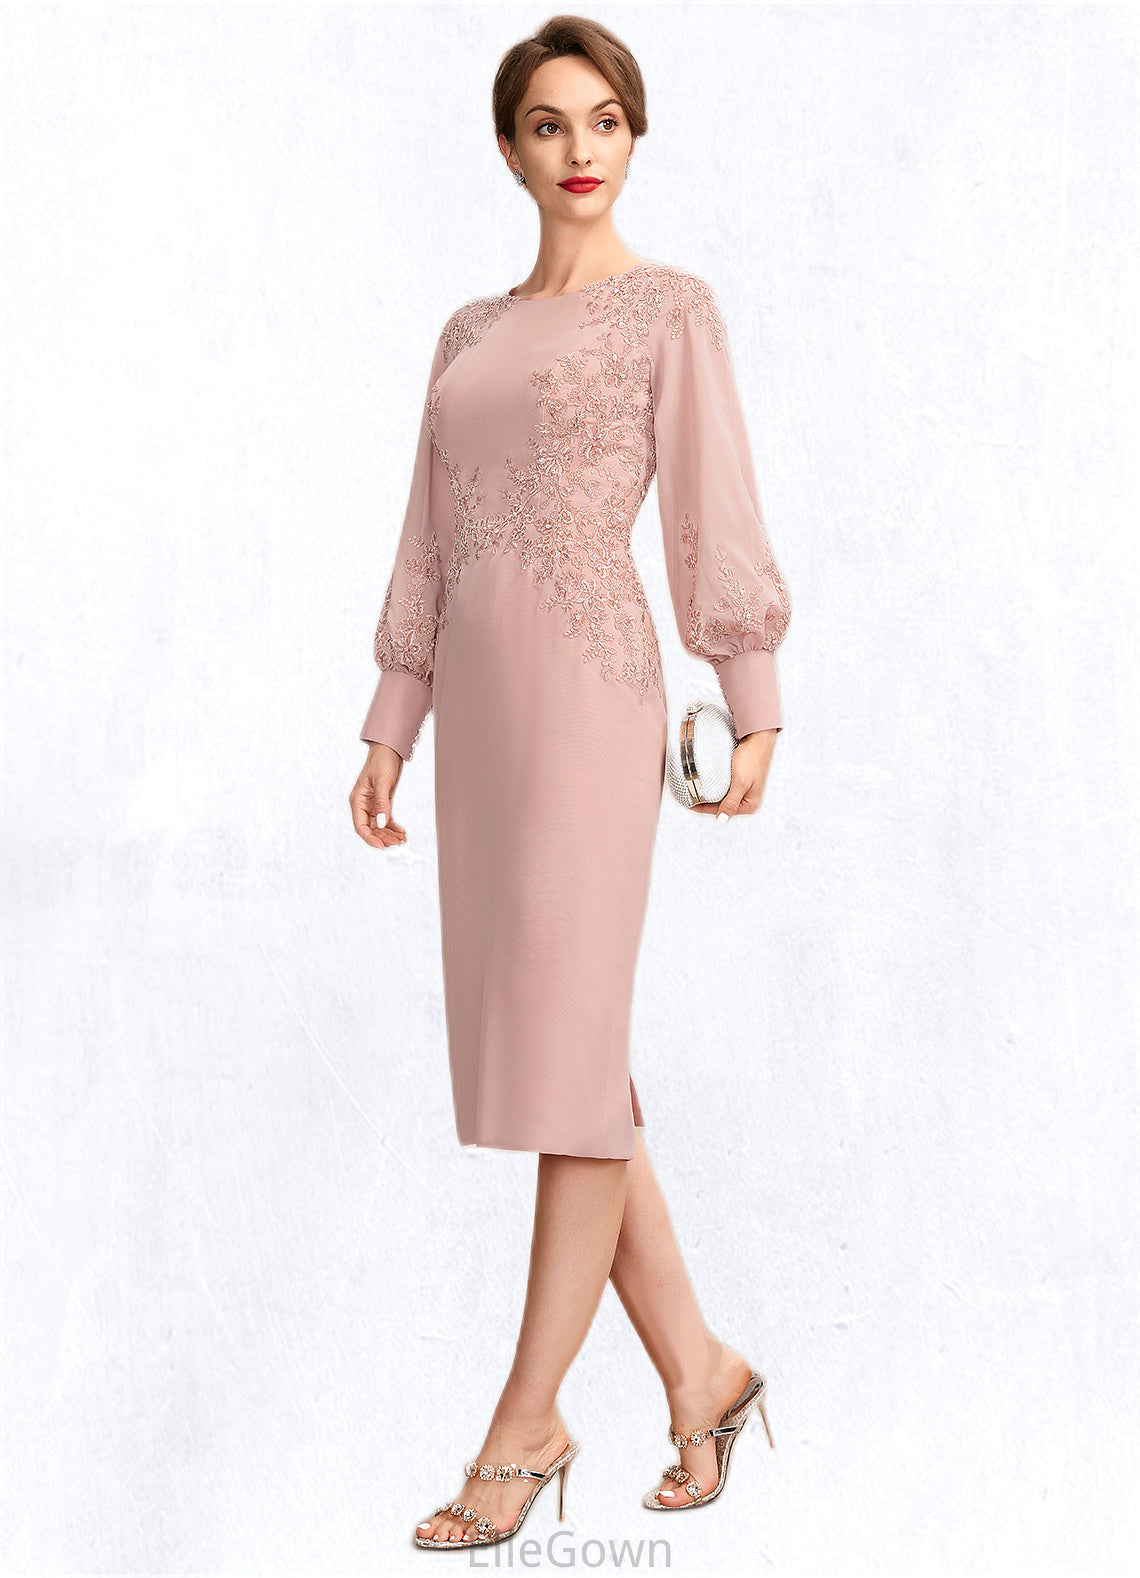 Martina Sheath/Column Scoop Neck Knee-Length Chiffon Lace Mother of the Bride Dress With Beading Sequins DE126P0015020